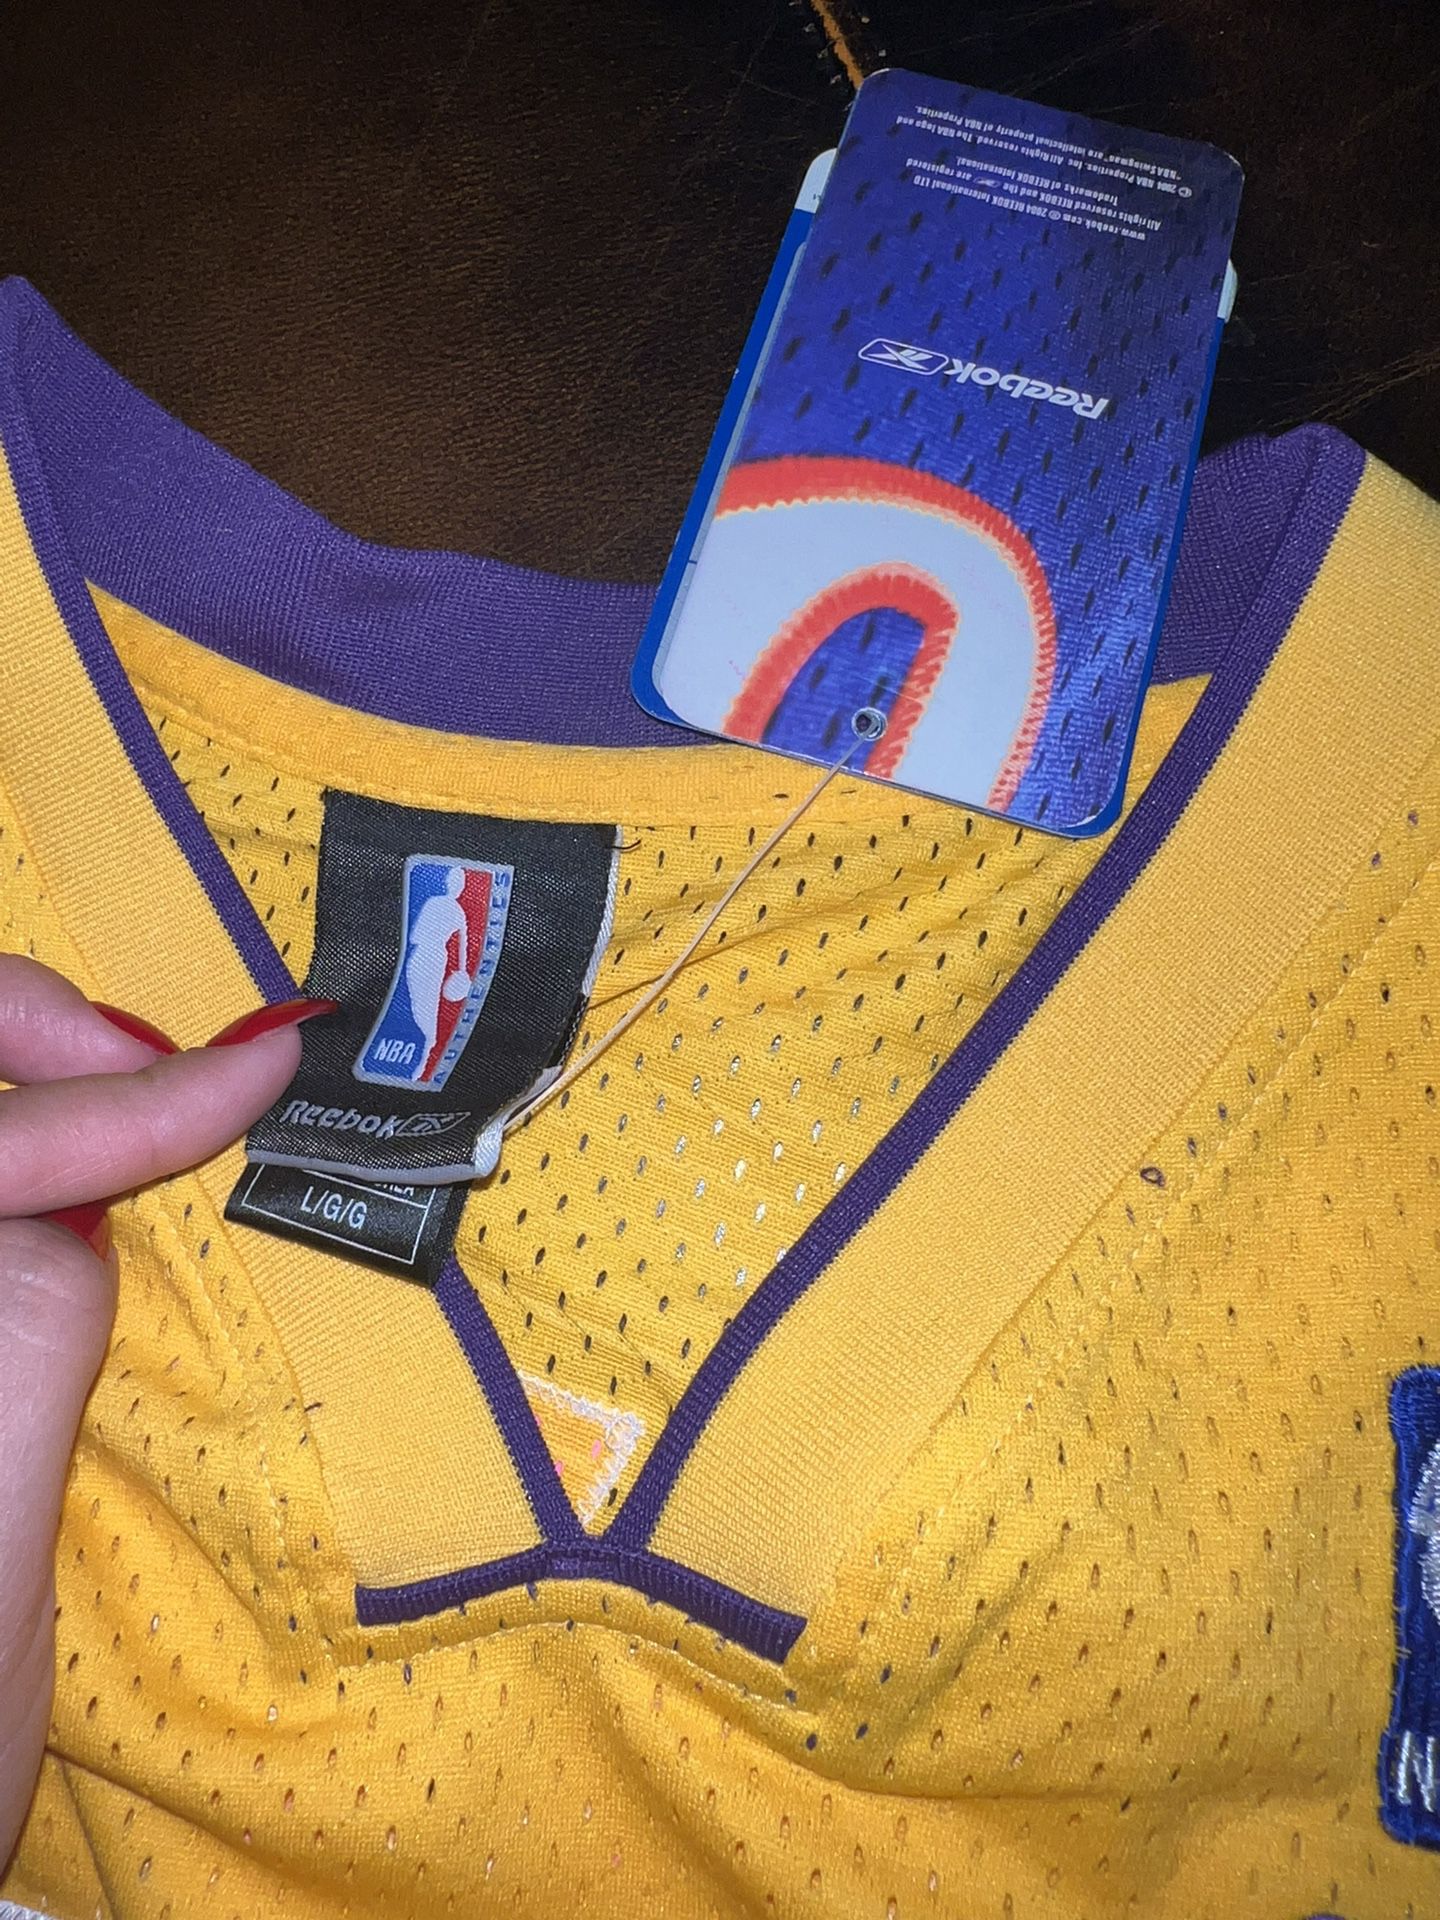 Vintage Never Worn Reebok Kobe Bryant Jersey for Sale in City Of Industry,  CA - OfferUp